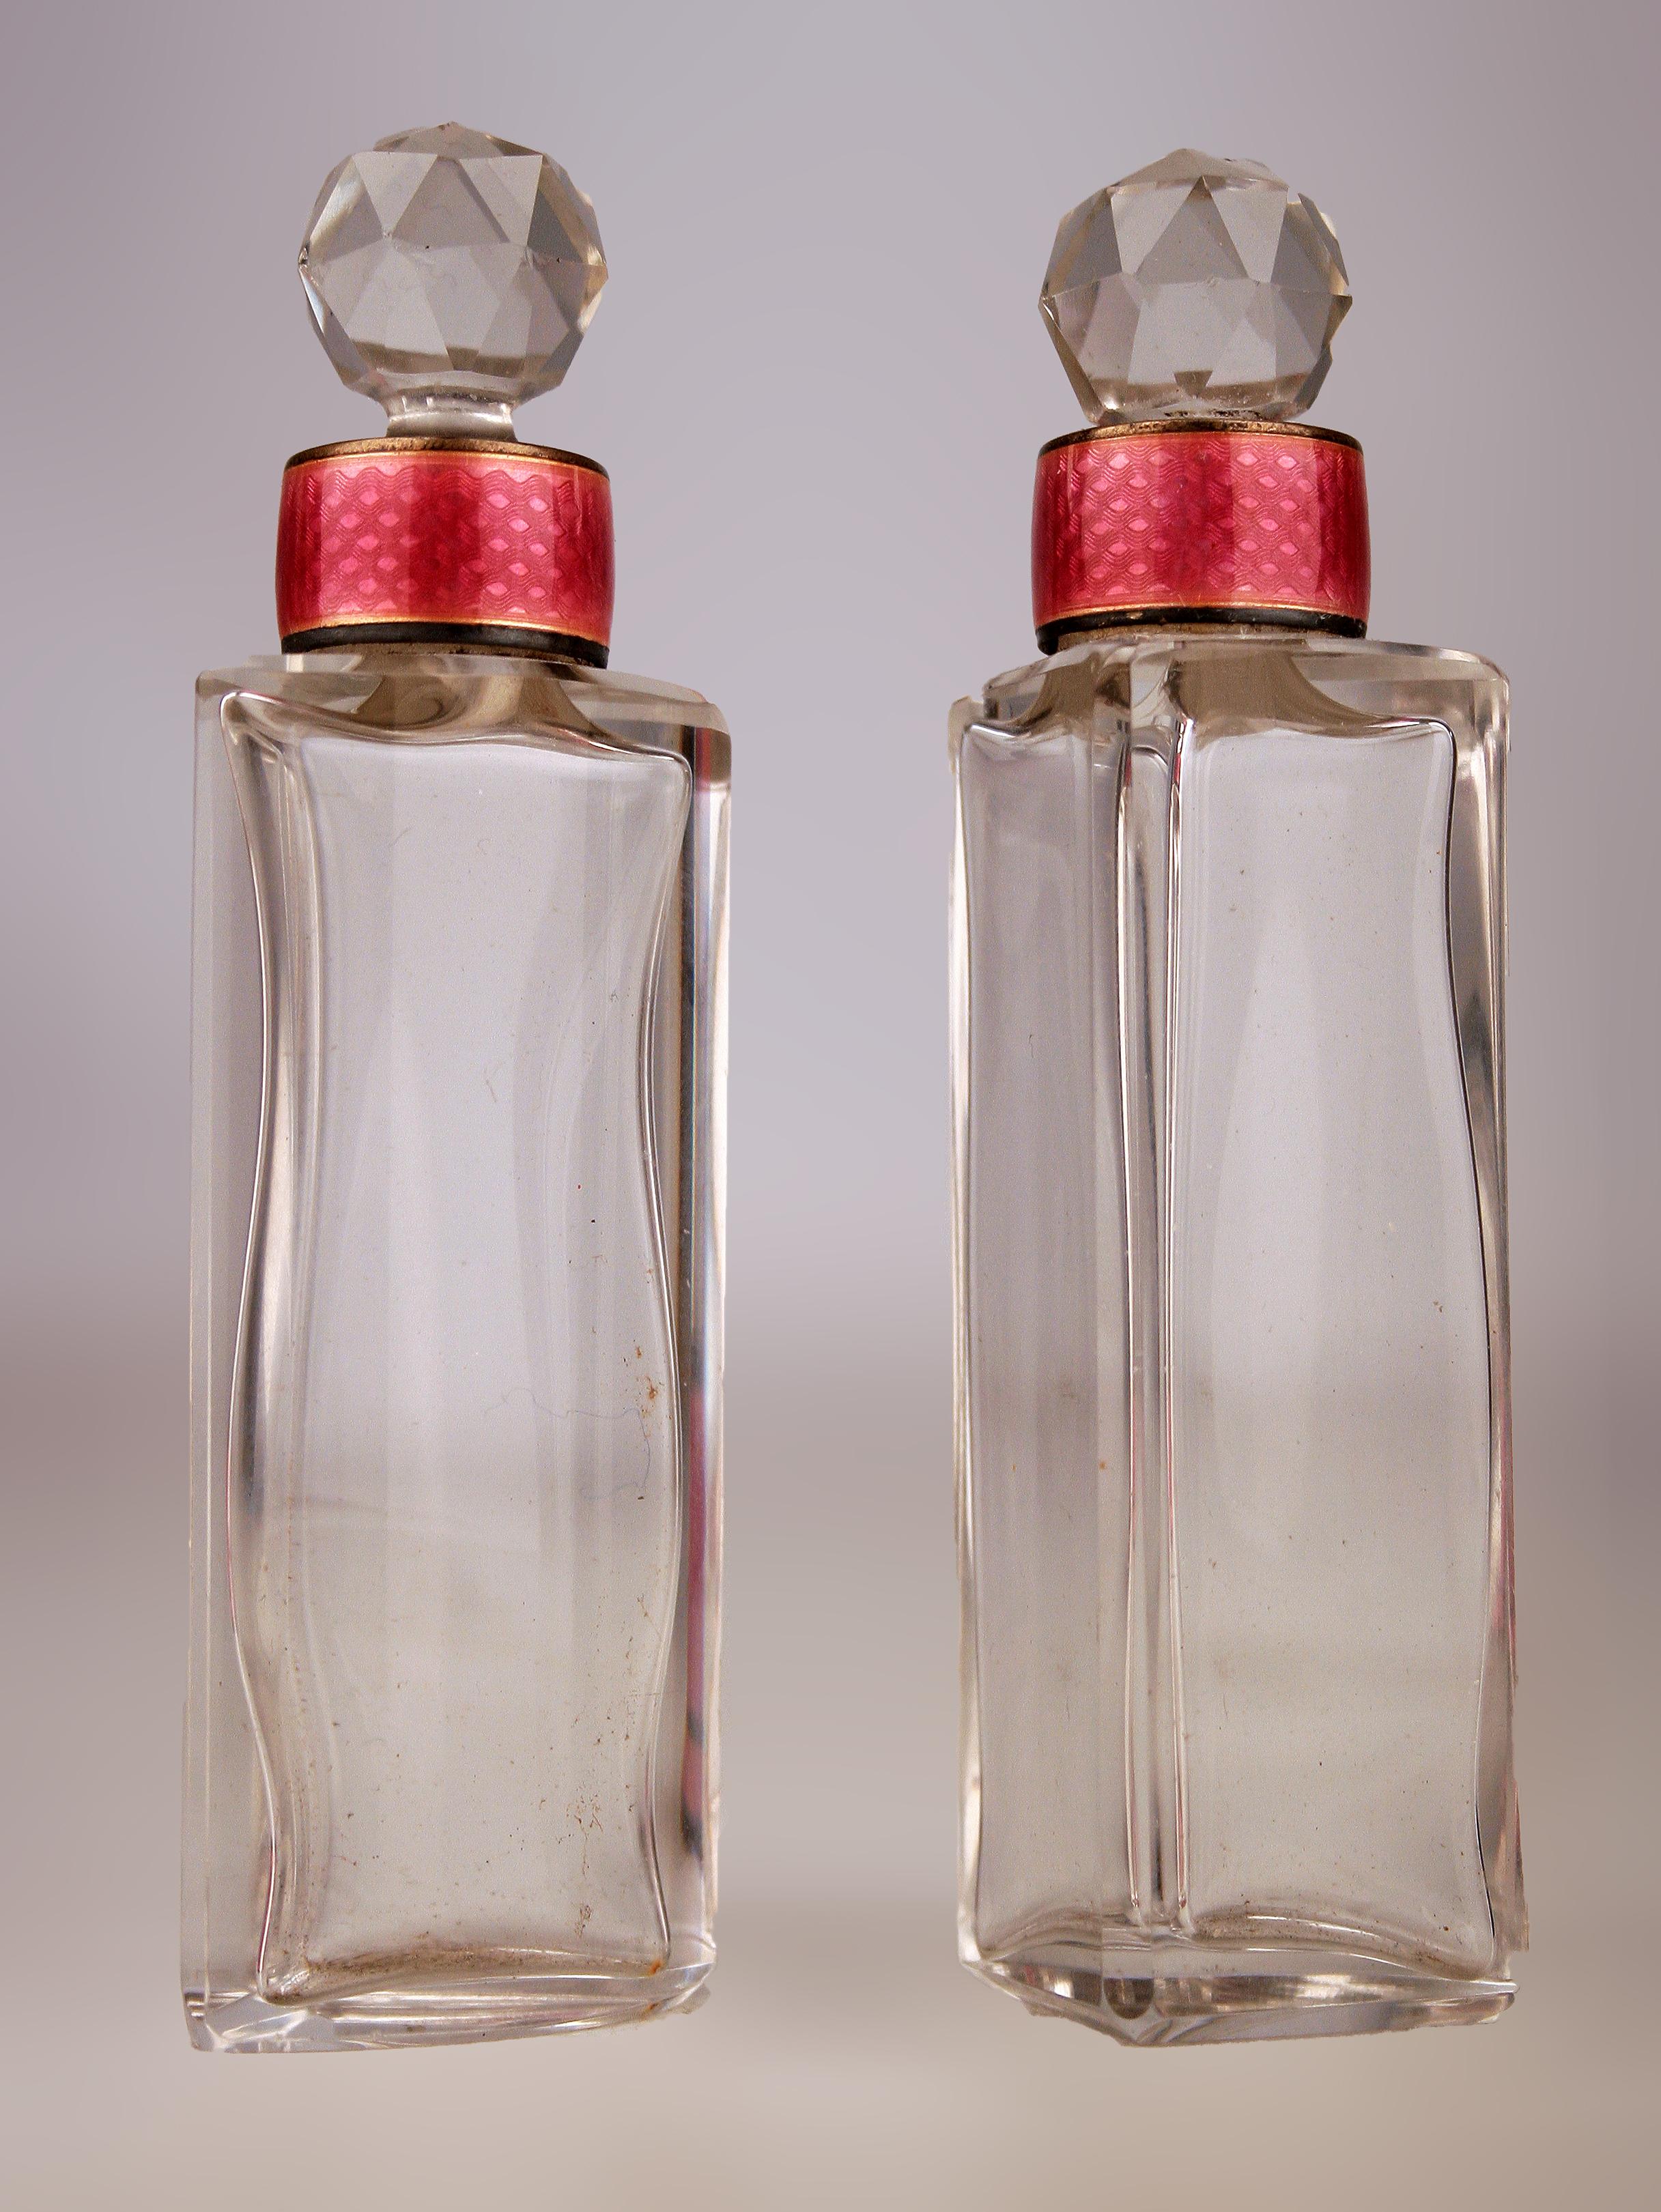 20th C. English Set of Guilloche Enamel Perfume Glass Bottles with Silver Base In Good Condition For Sale In North Miami, FL